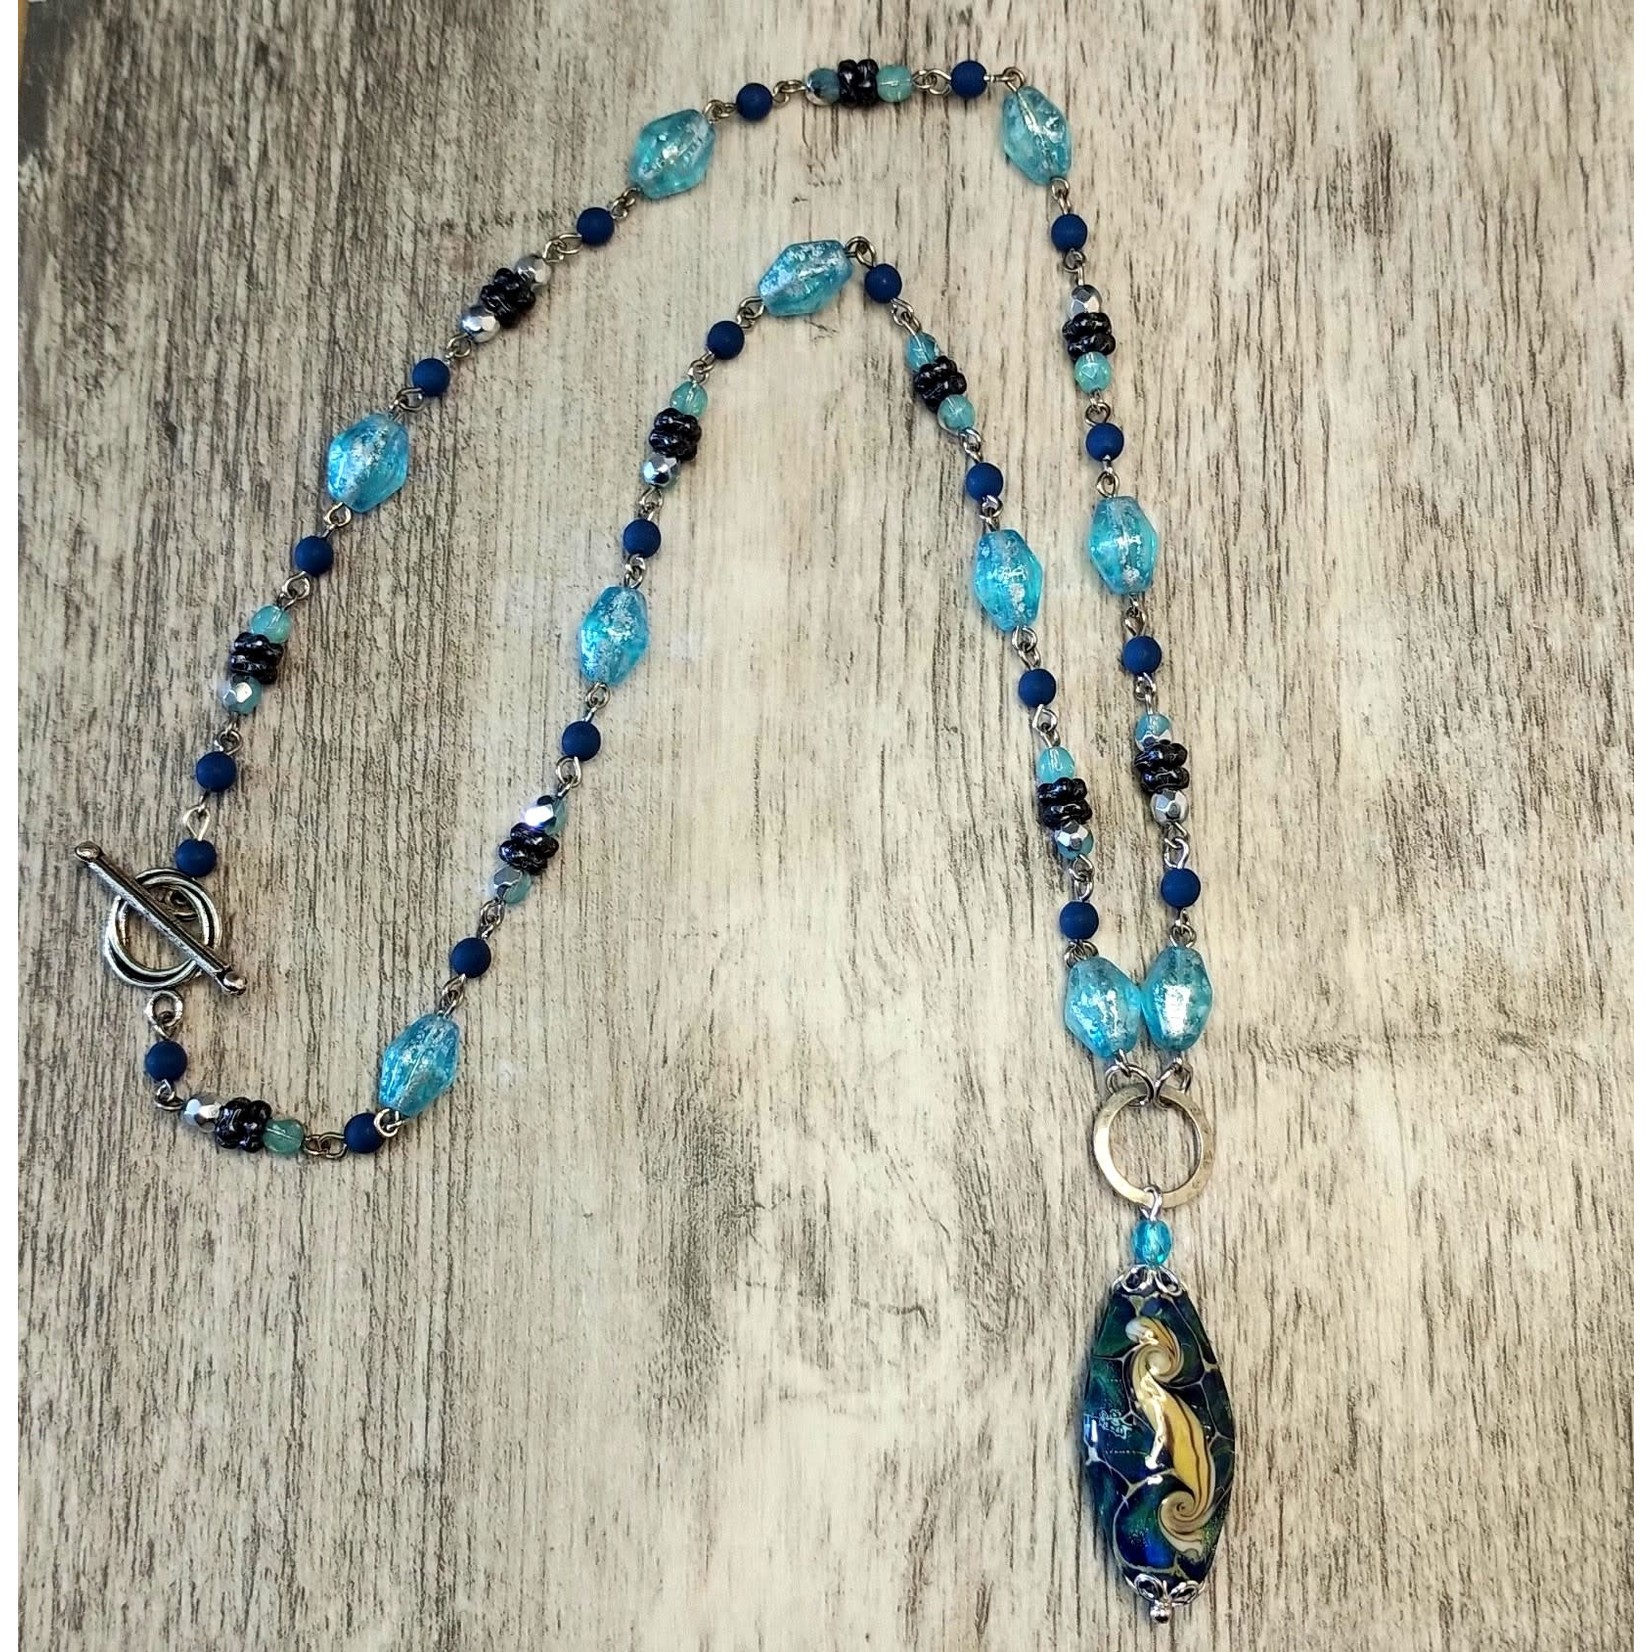 Czech Glass Beaded Chain Blue/Turquoise - 1 Foot